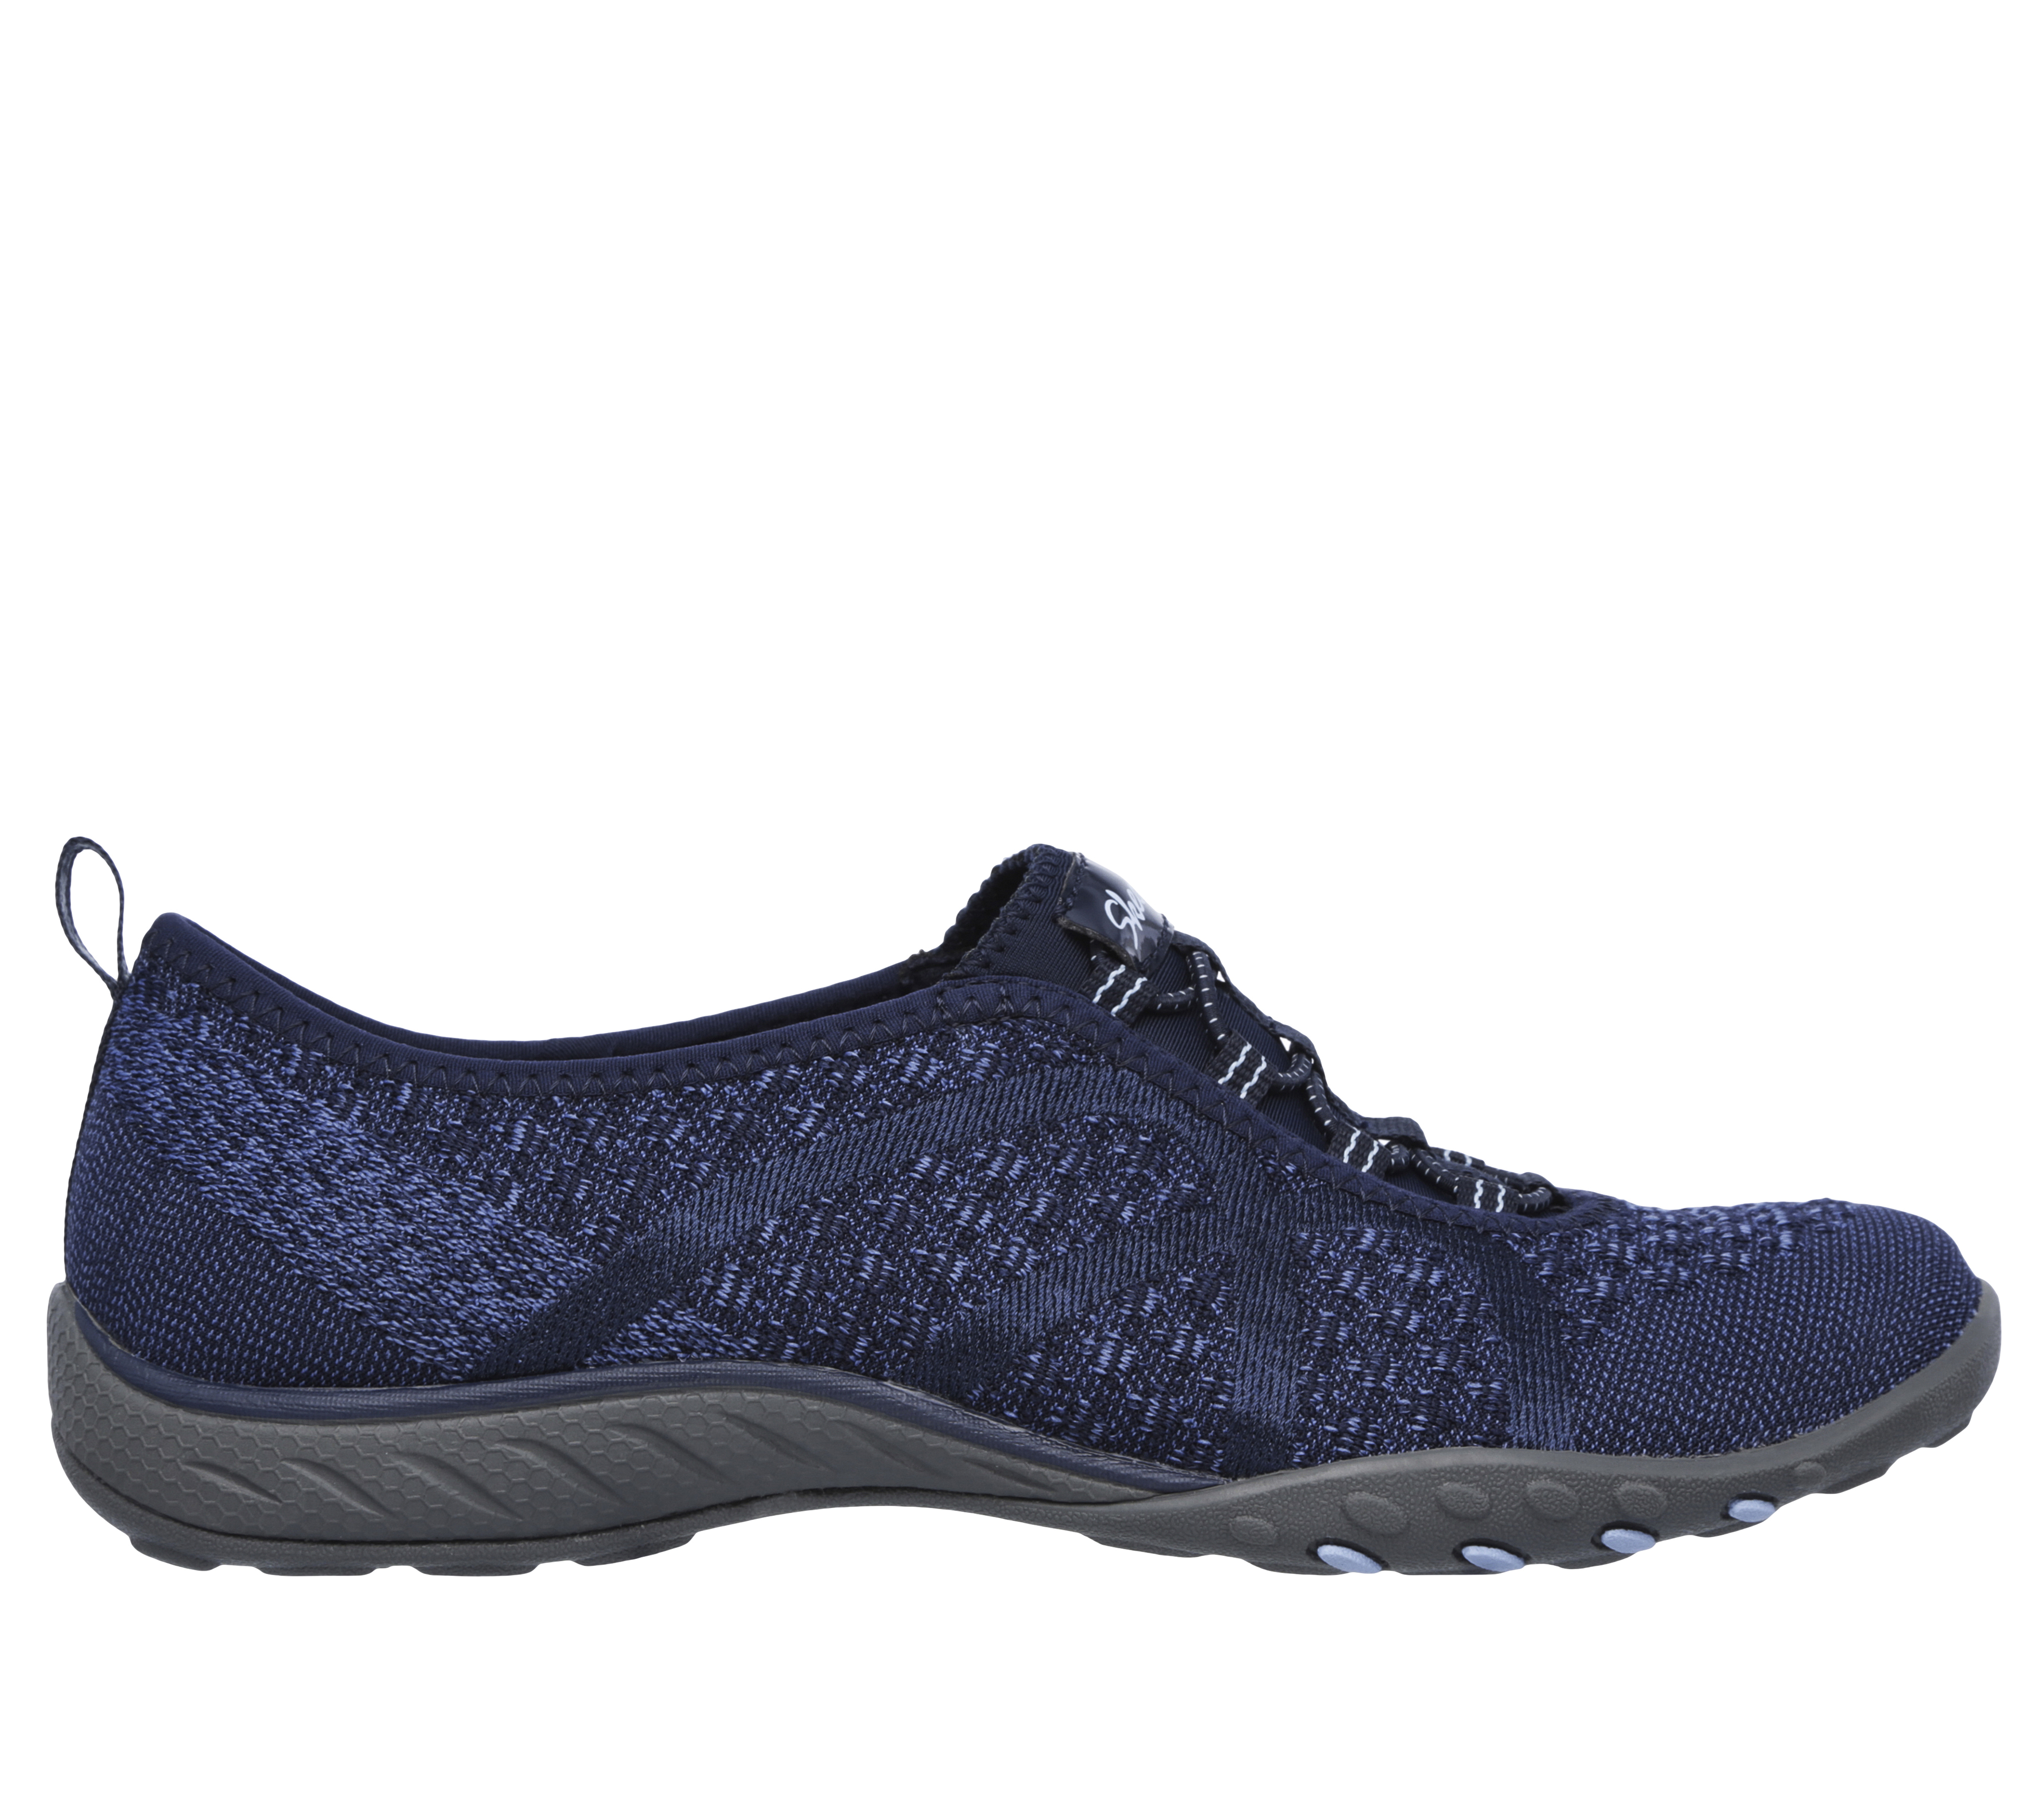 Shop the Relaxed Fit: Breathe Easy - Fortune-Knit | SKECHERS